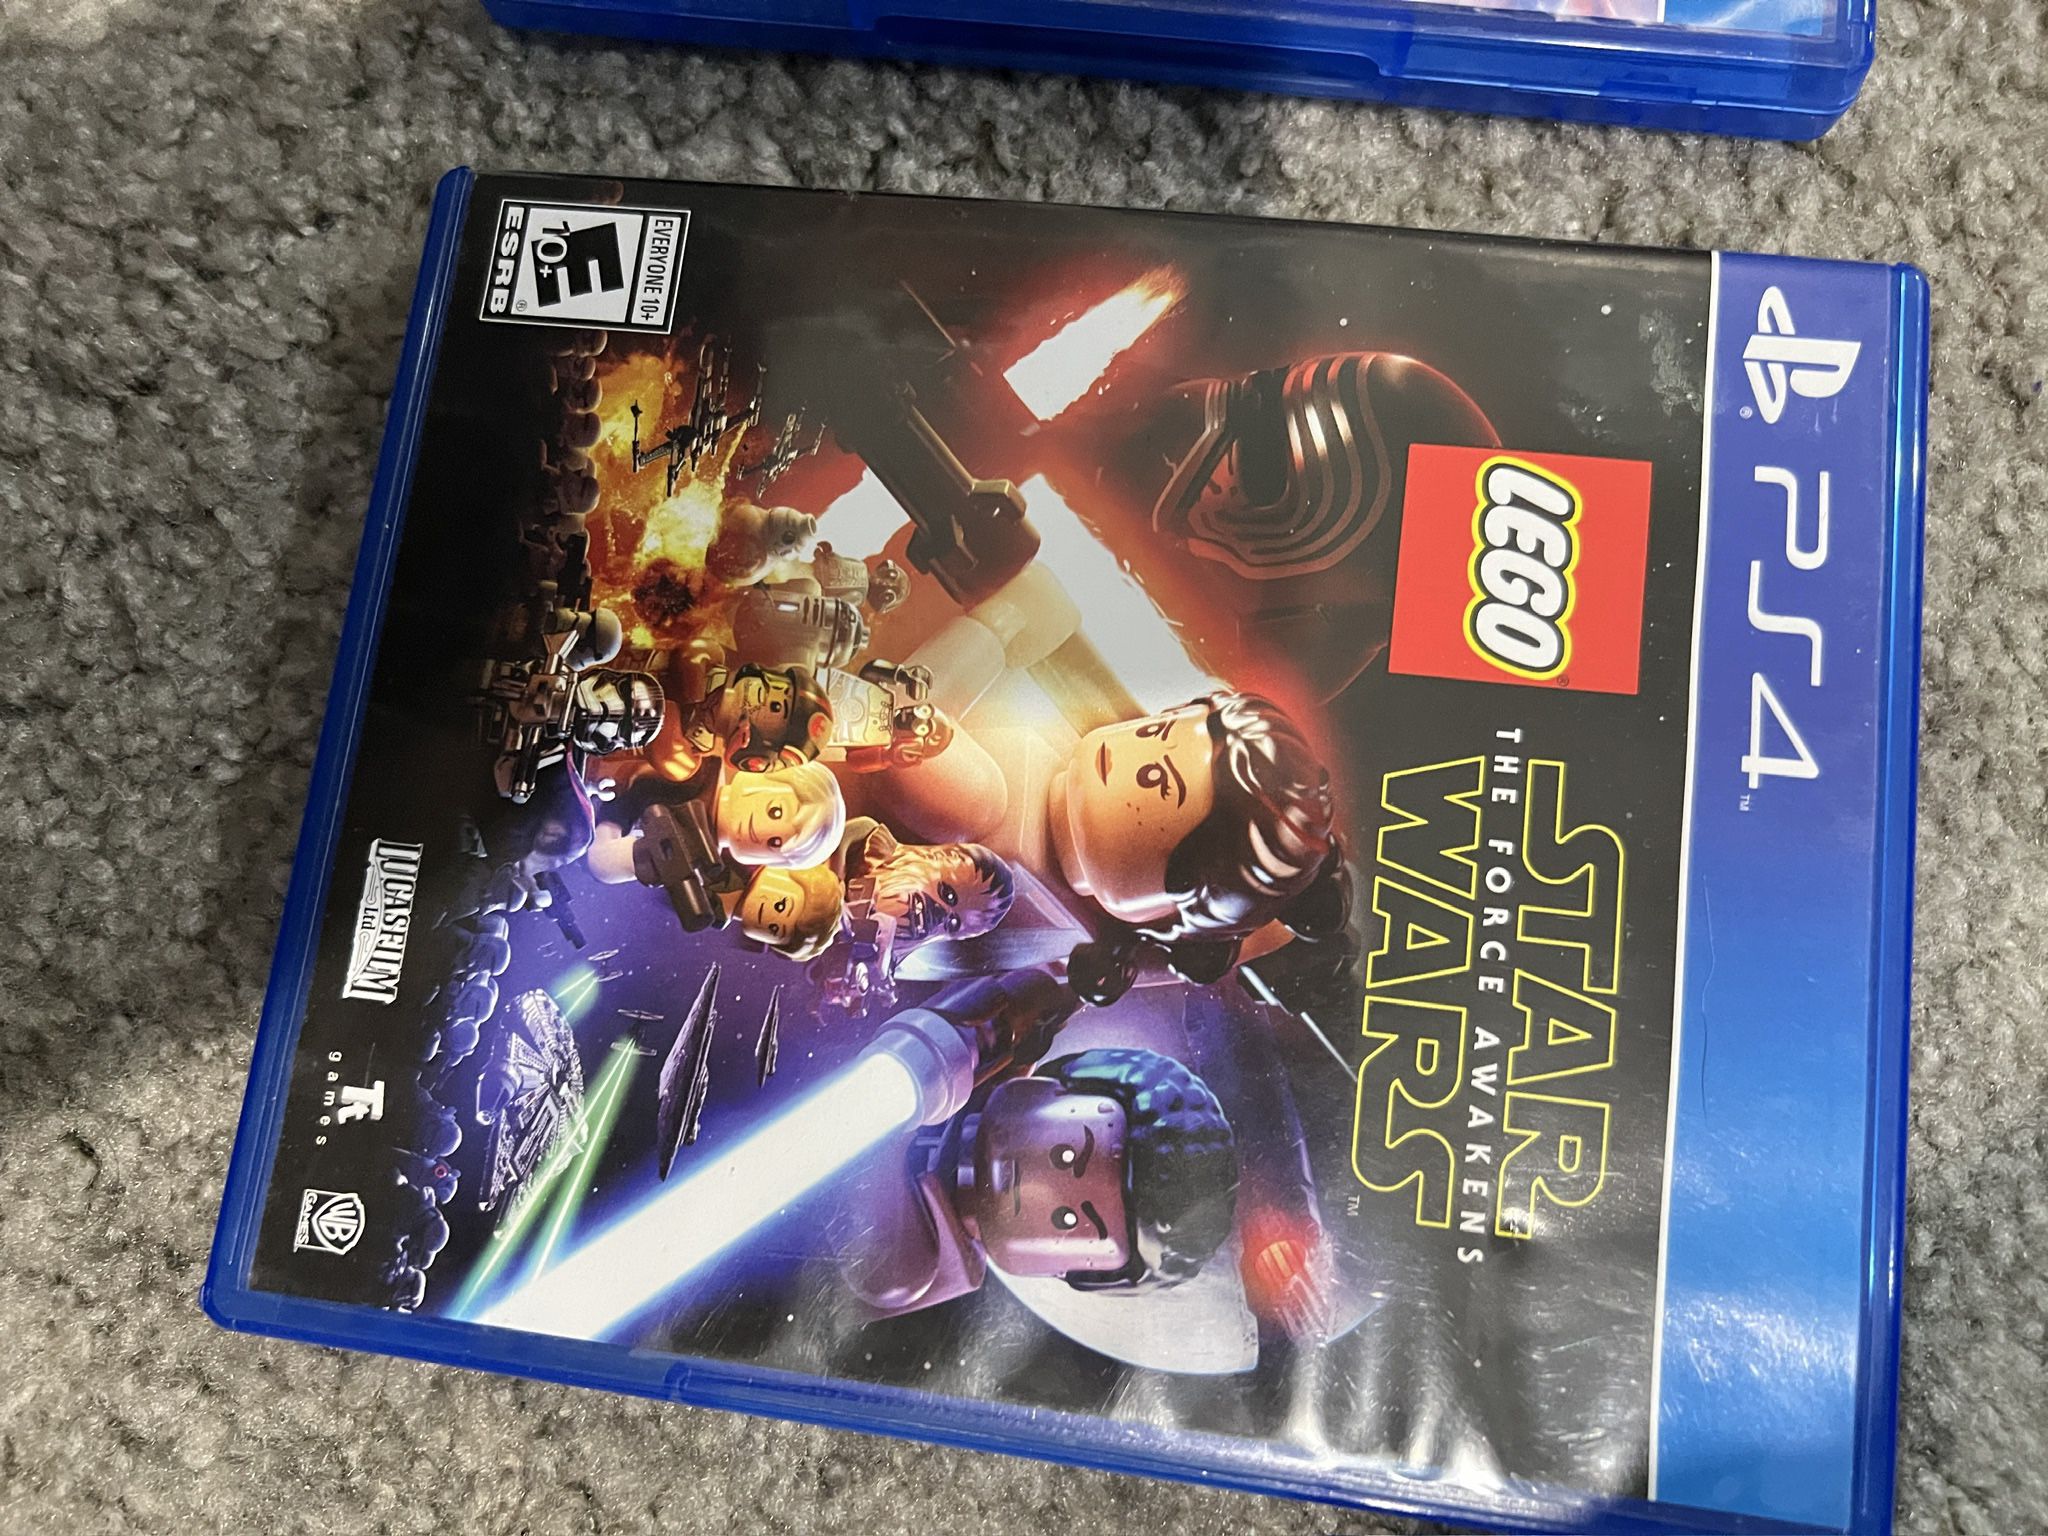 ps4 star wars lego game